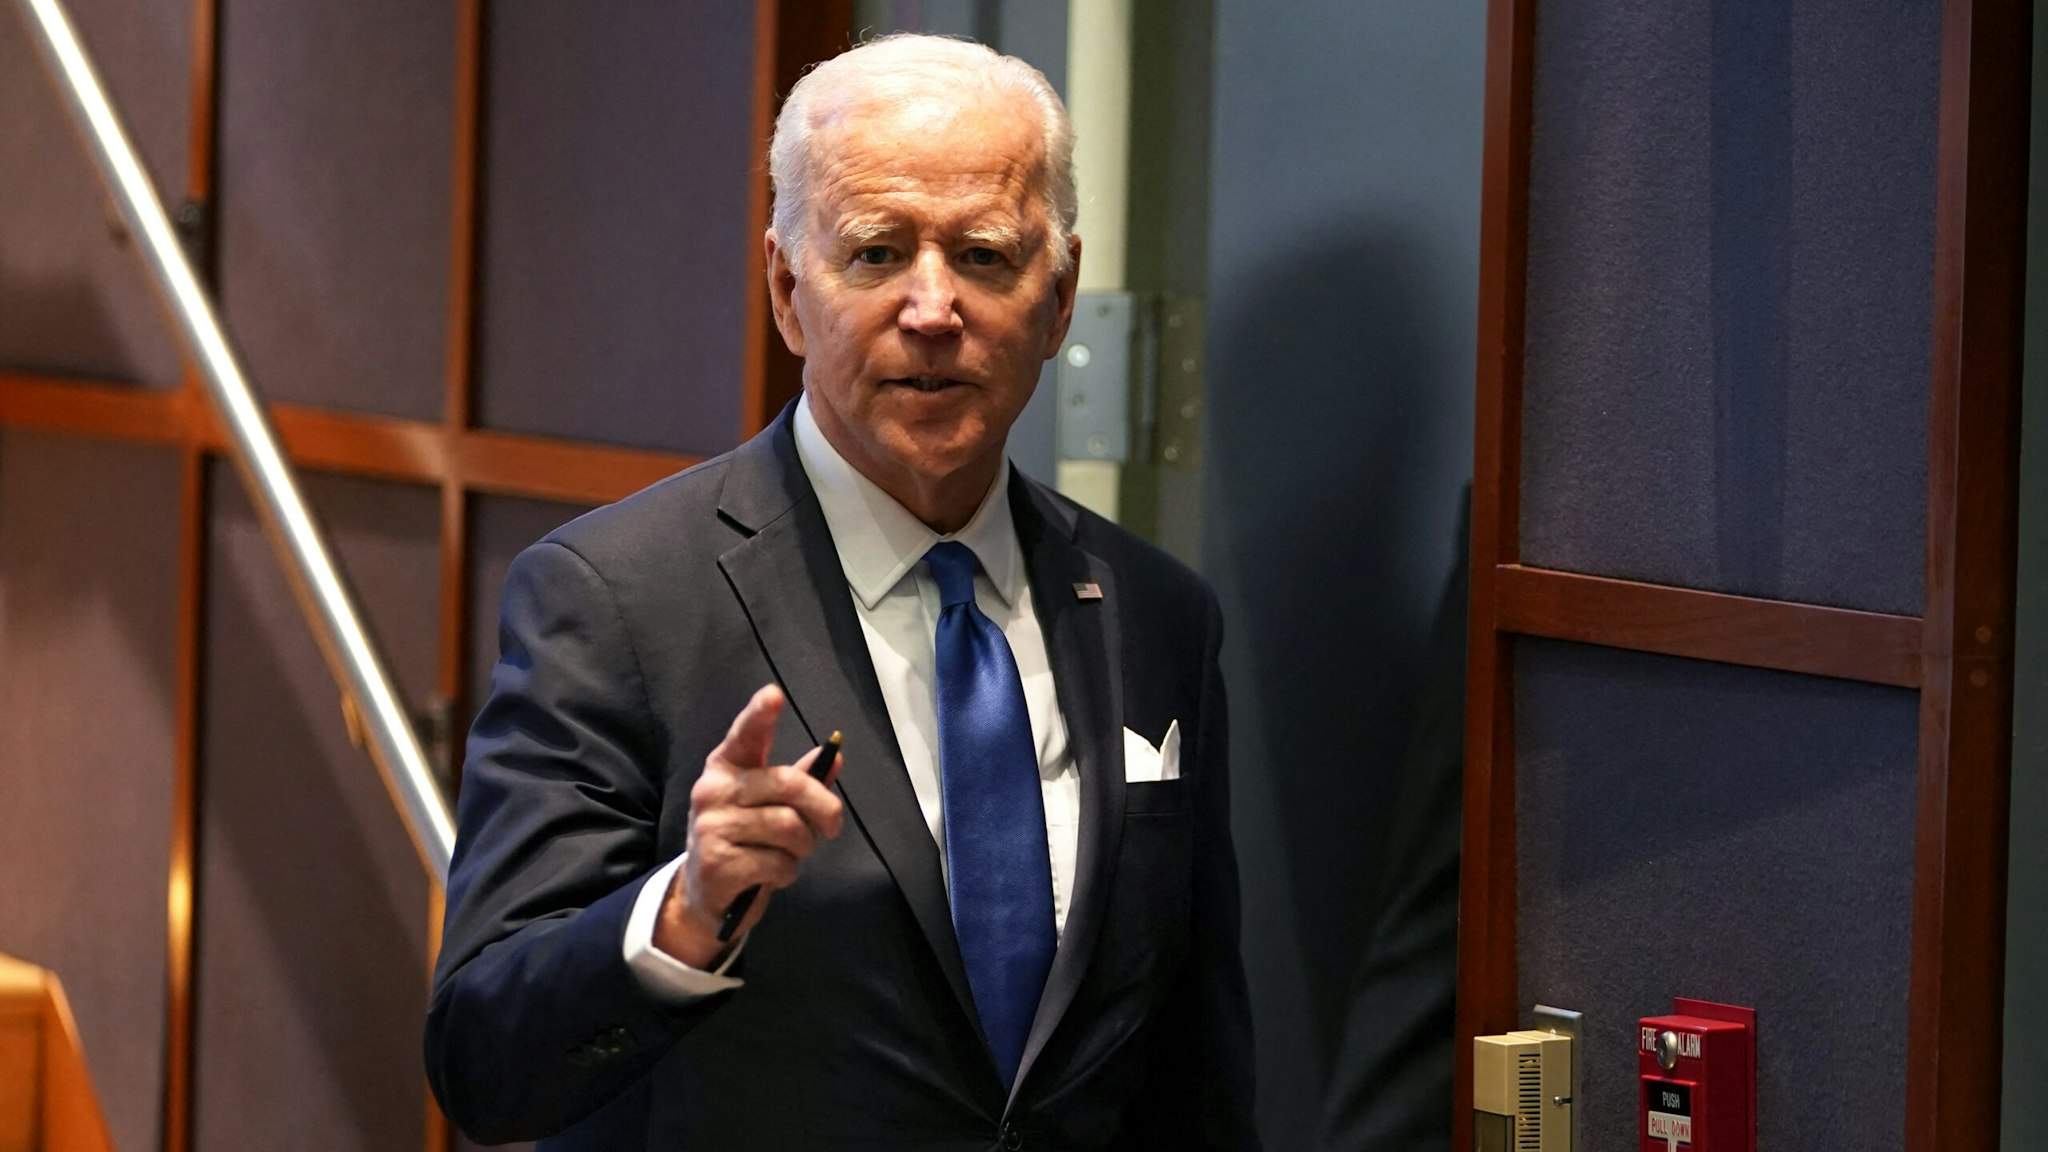 US President Joe Biden answers a question about the government shutdown after speaking about the administrations response to Covid-19 and the Omicron variant at the National Institutes of Health (NIH) in Bethesda, Maryland on December 2, 2021.